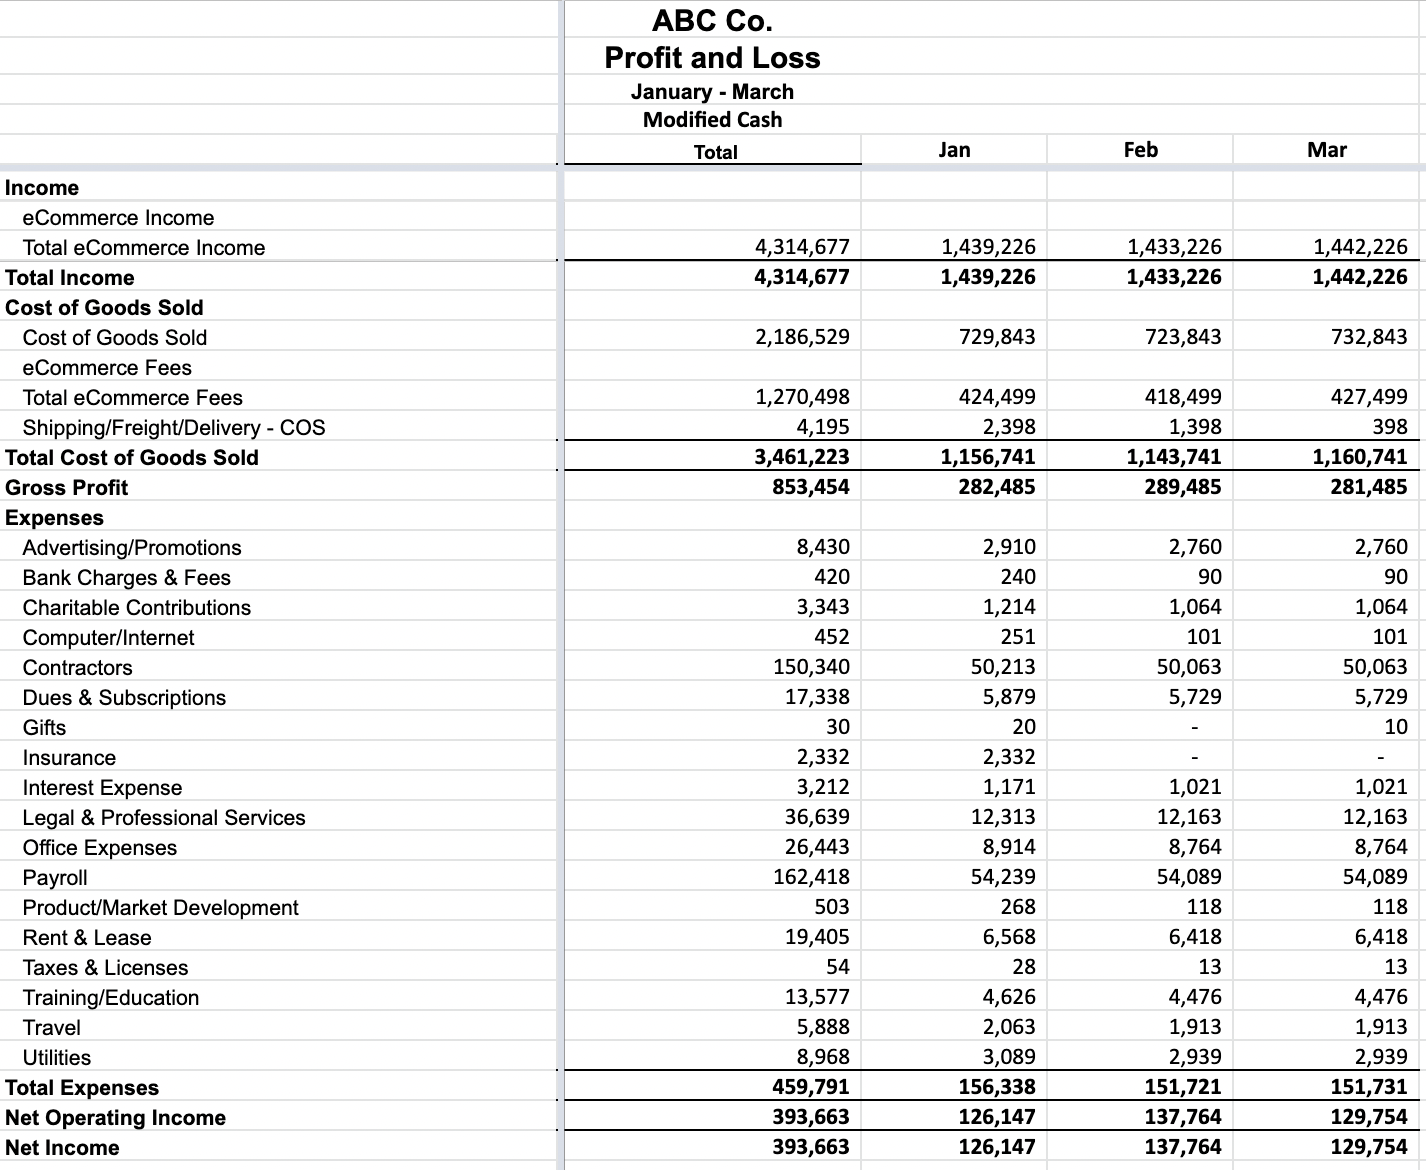 An example of a modified cash financial statement